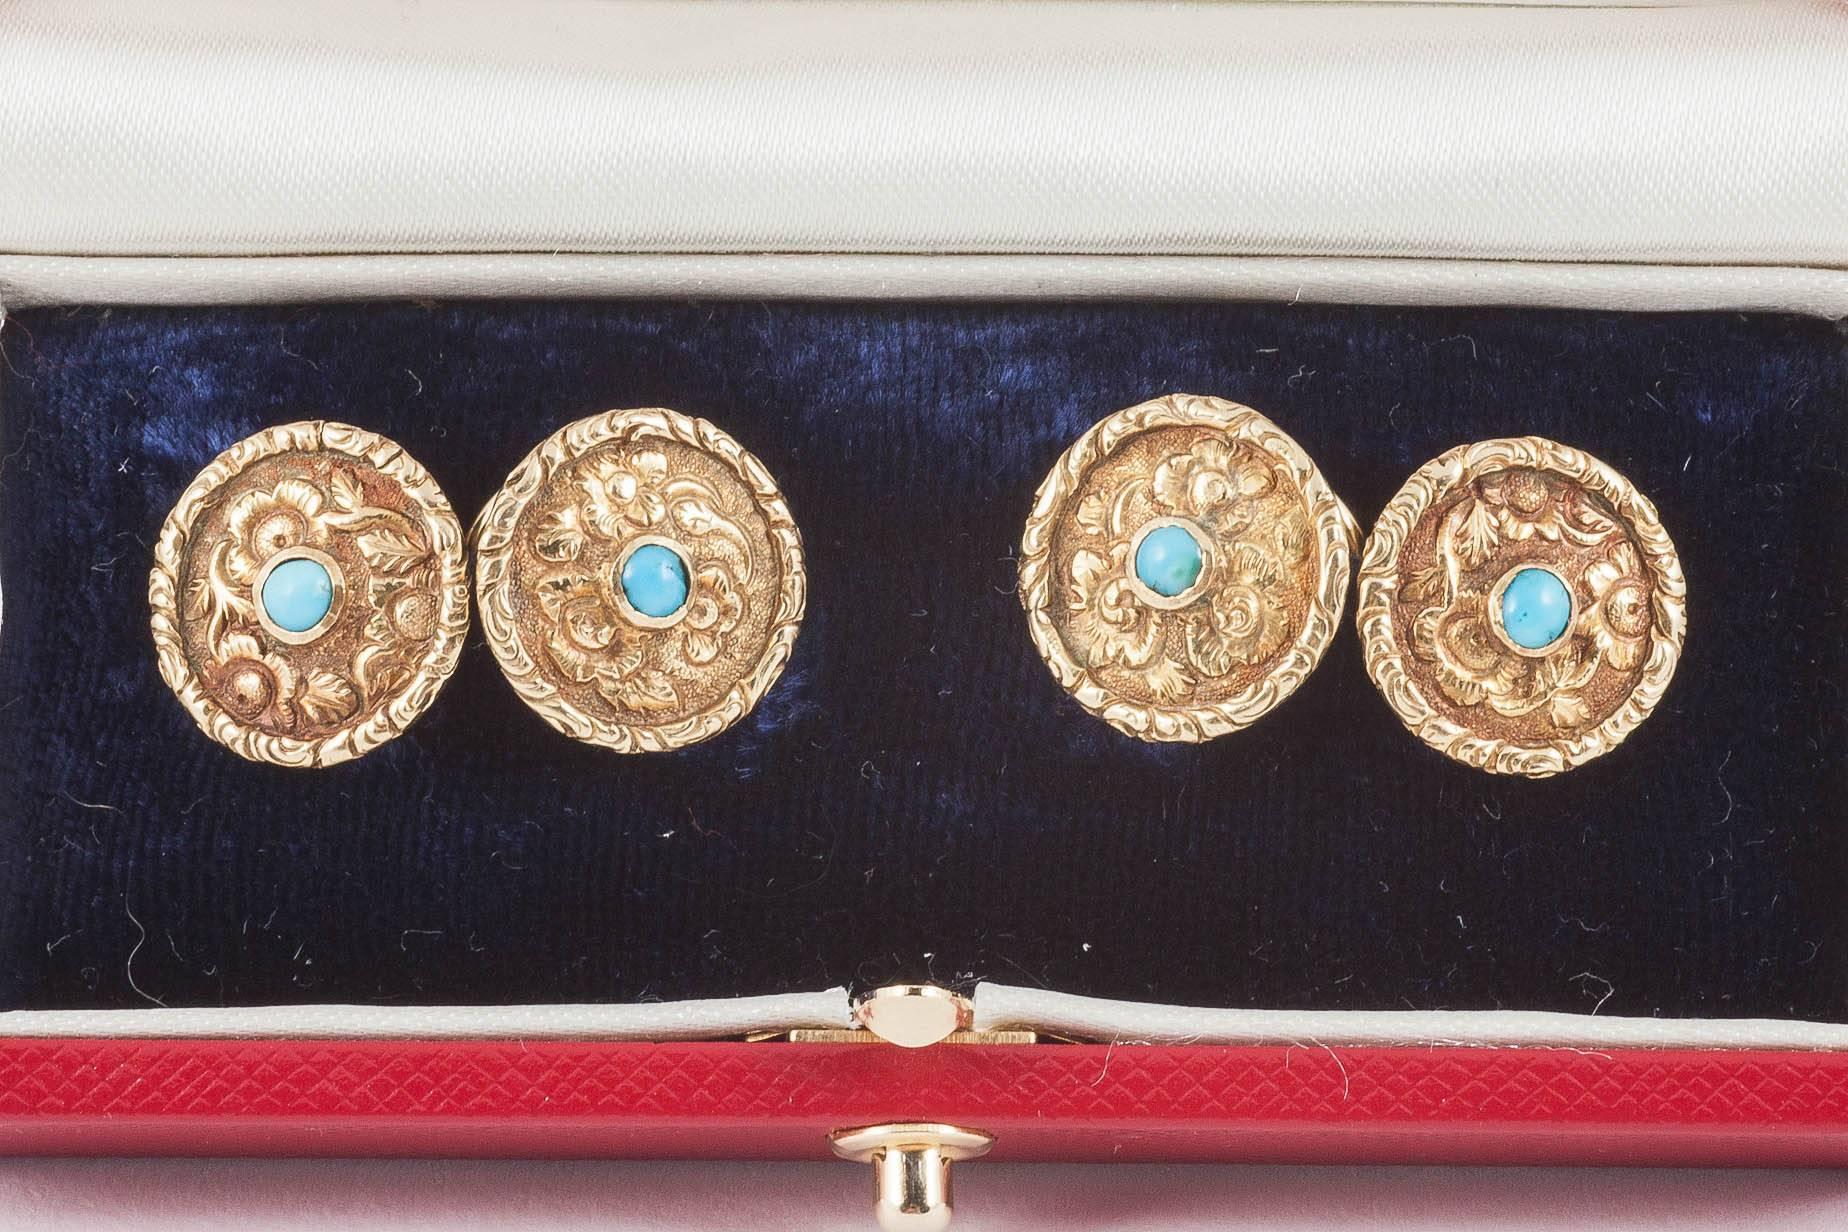 A finely carved pair of floral decorated double sided cufflinks in the pattern of roses with a turquoise centre. 18 carat yellow gold of two colours. Figure of eight connections.
Measures 14mm in width.
Antique piece (over 100 years old).
Early